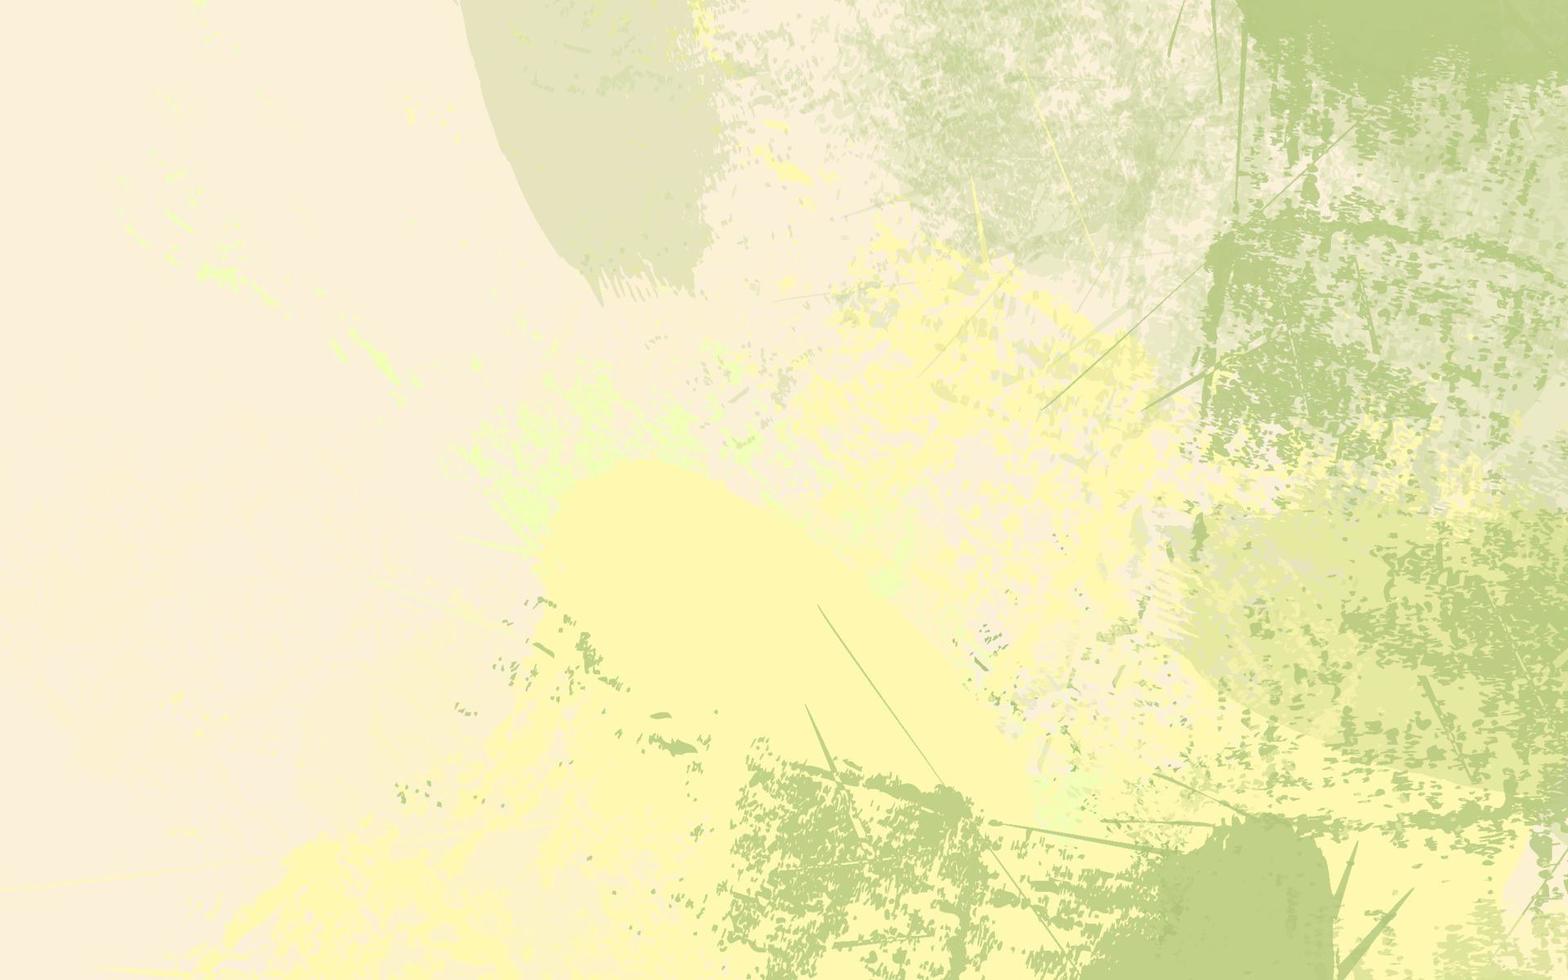 Abstract grunge texture pastel green and yellow color background vector